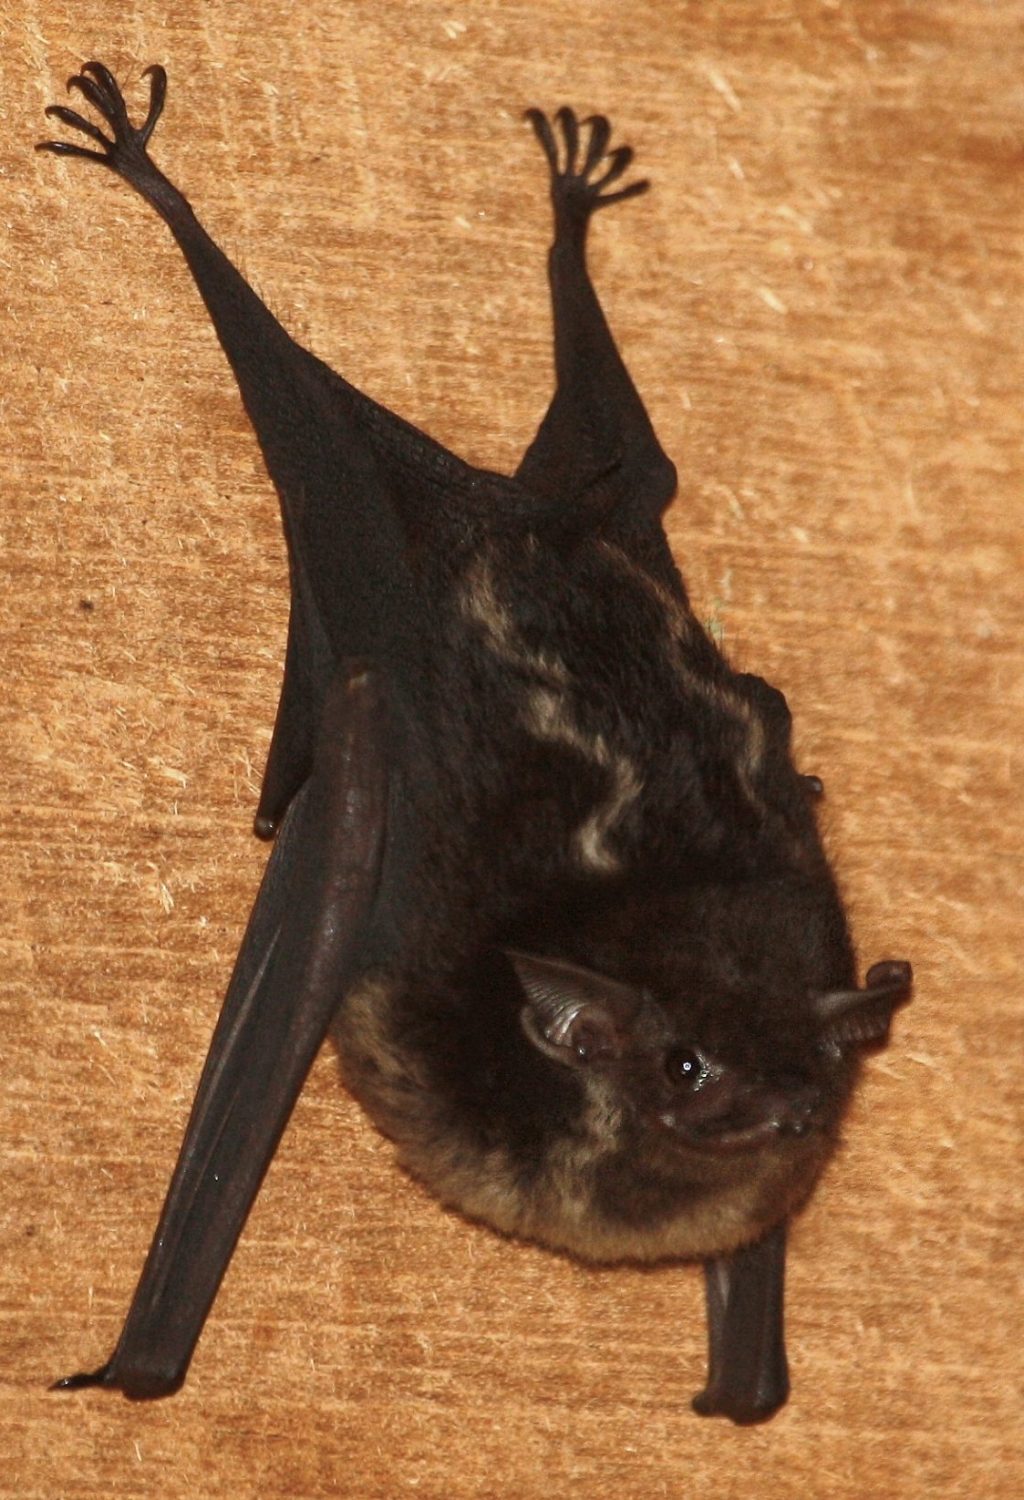 A greater sac-winged bat (Saccopteryx bilineata, showing off some wavy lines on its back. These bats roost in relatively open places like tree trunks, and it is thought the lines help break up their outline so they blend in. Photo: Karin Schneeberger/Wikimedia Commons